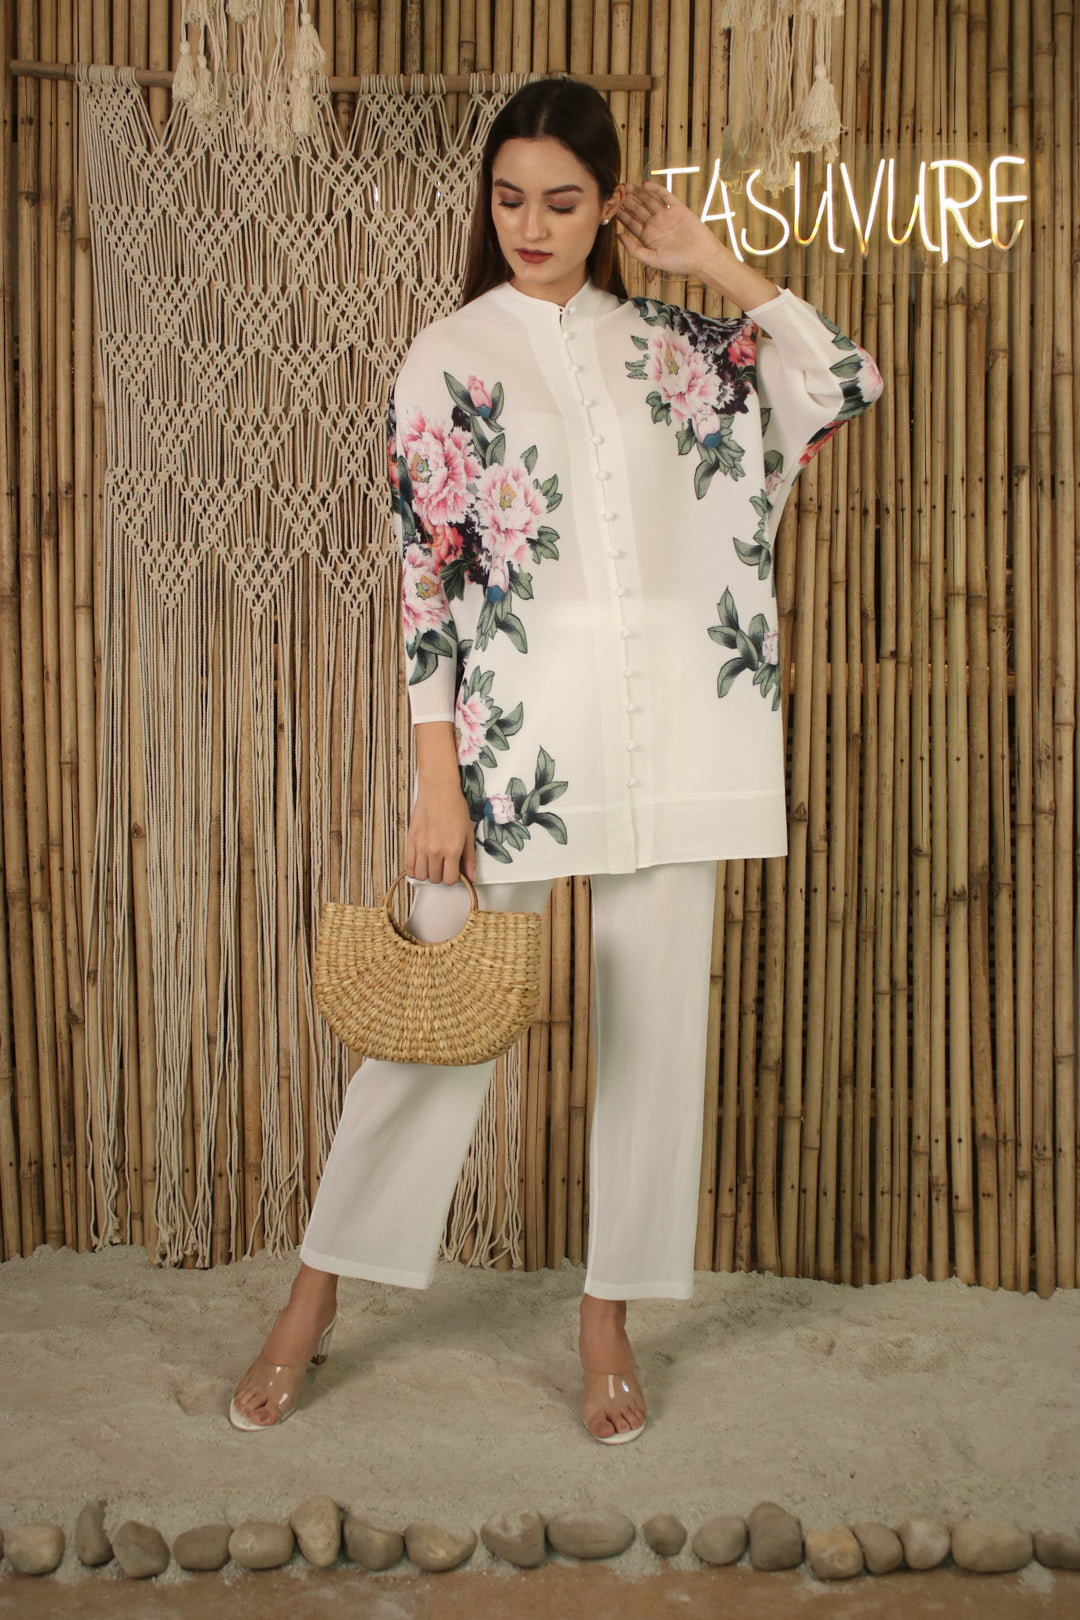 Shop Latest Style White Floral Shirt & Pleated Pant Co ord for Women Online. Shop Designer Outfit from Exclusive Collection of Womenswear at Tasuvure